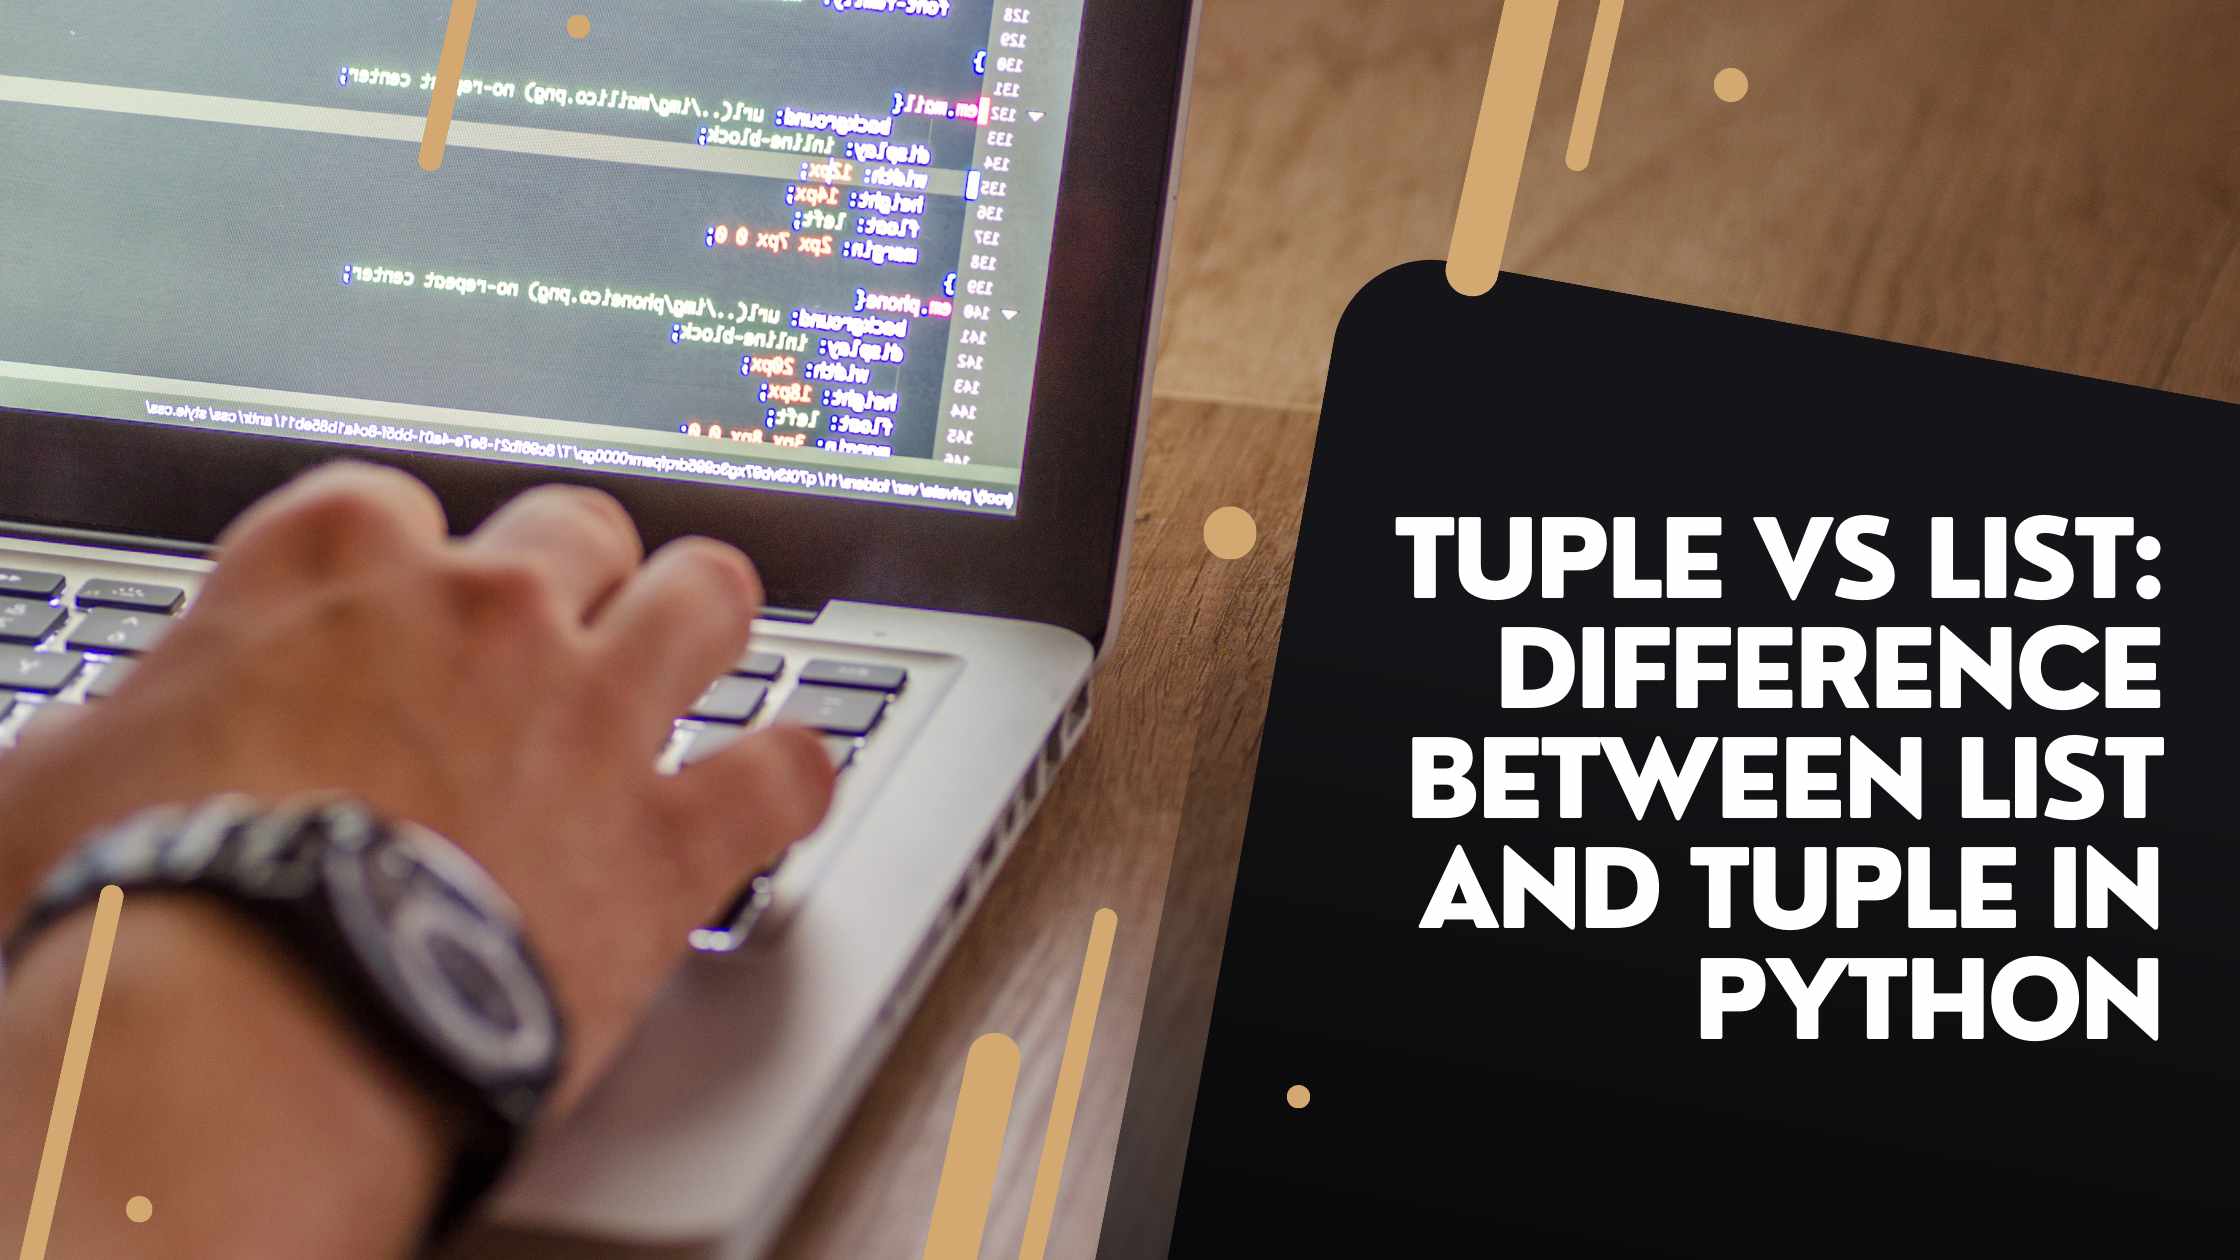 Where Does the Difference Between Lists and Tuples Come From?